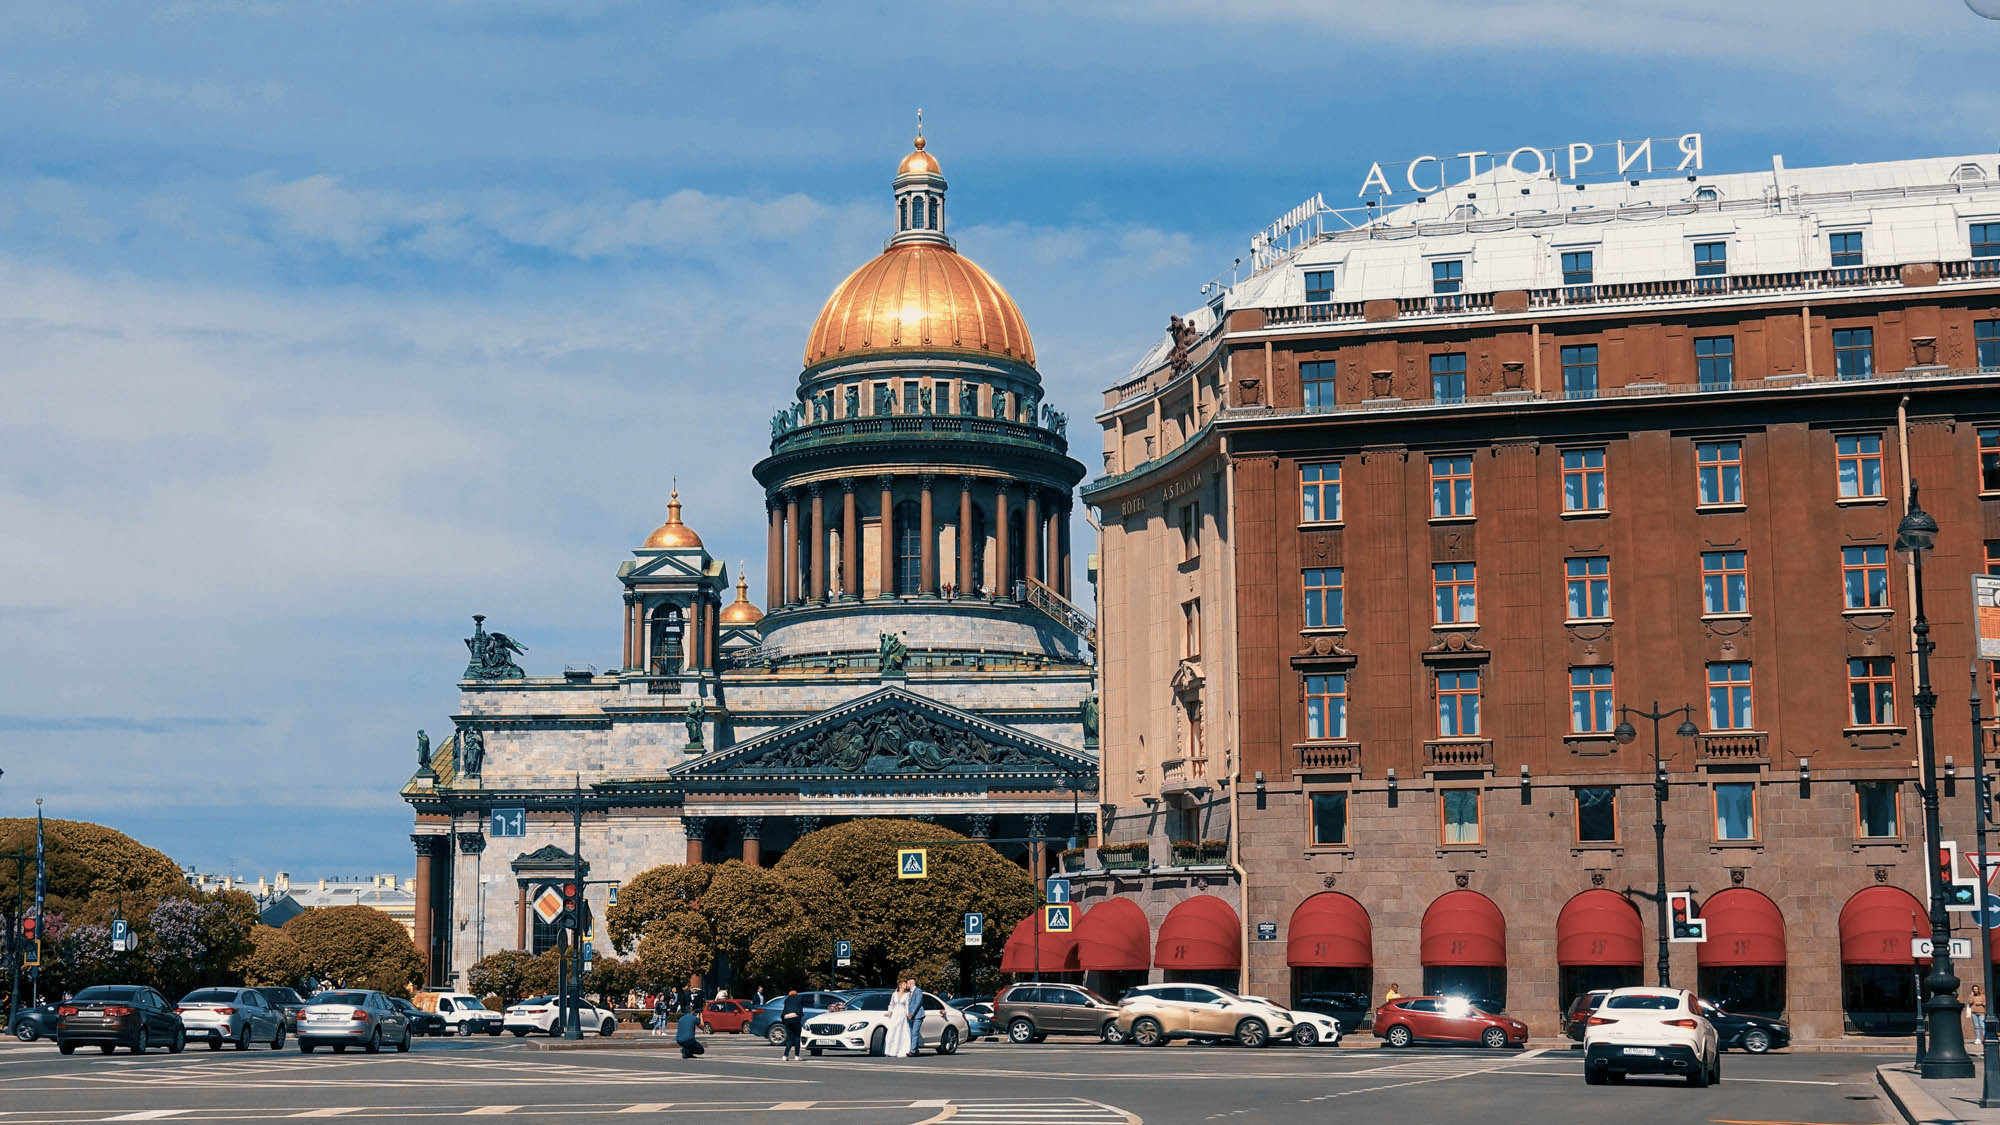 Hotel Astoria in St Petersburg, St Isaac’s cathedral behind